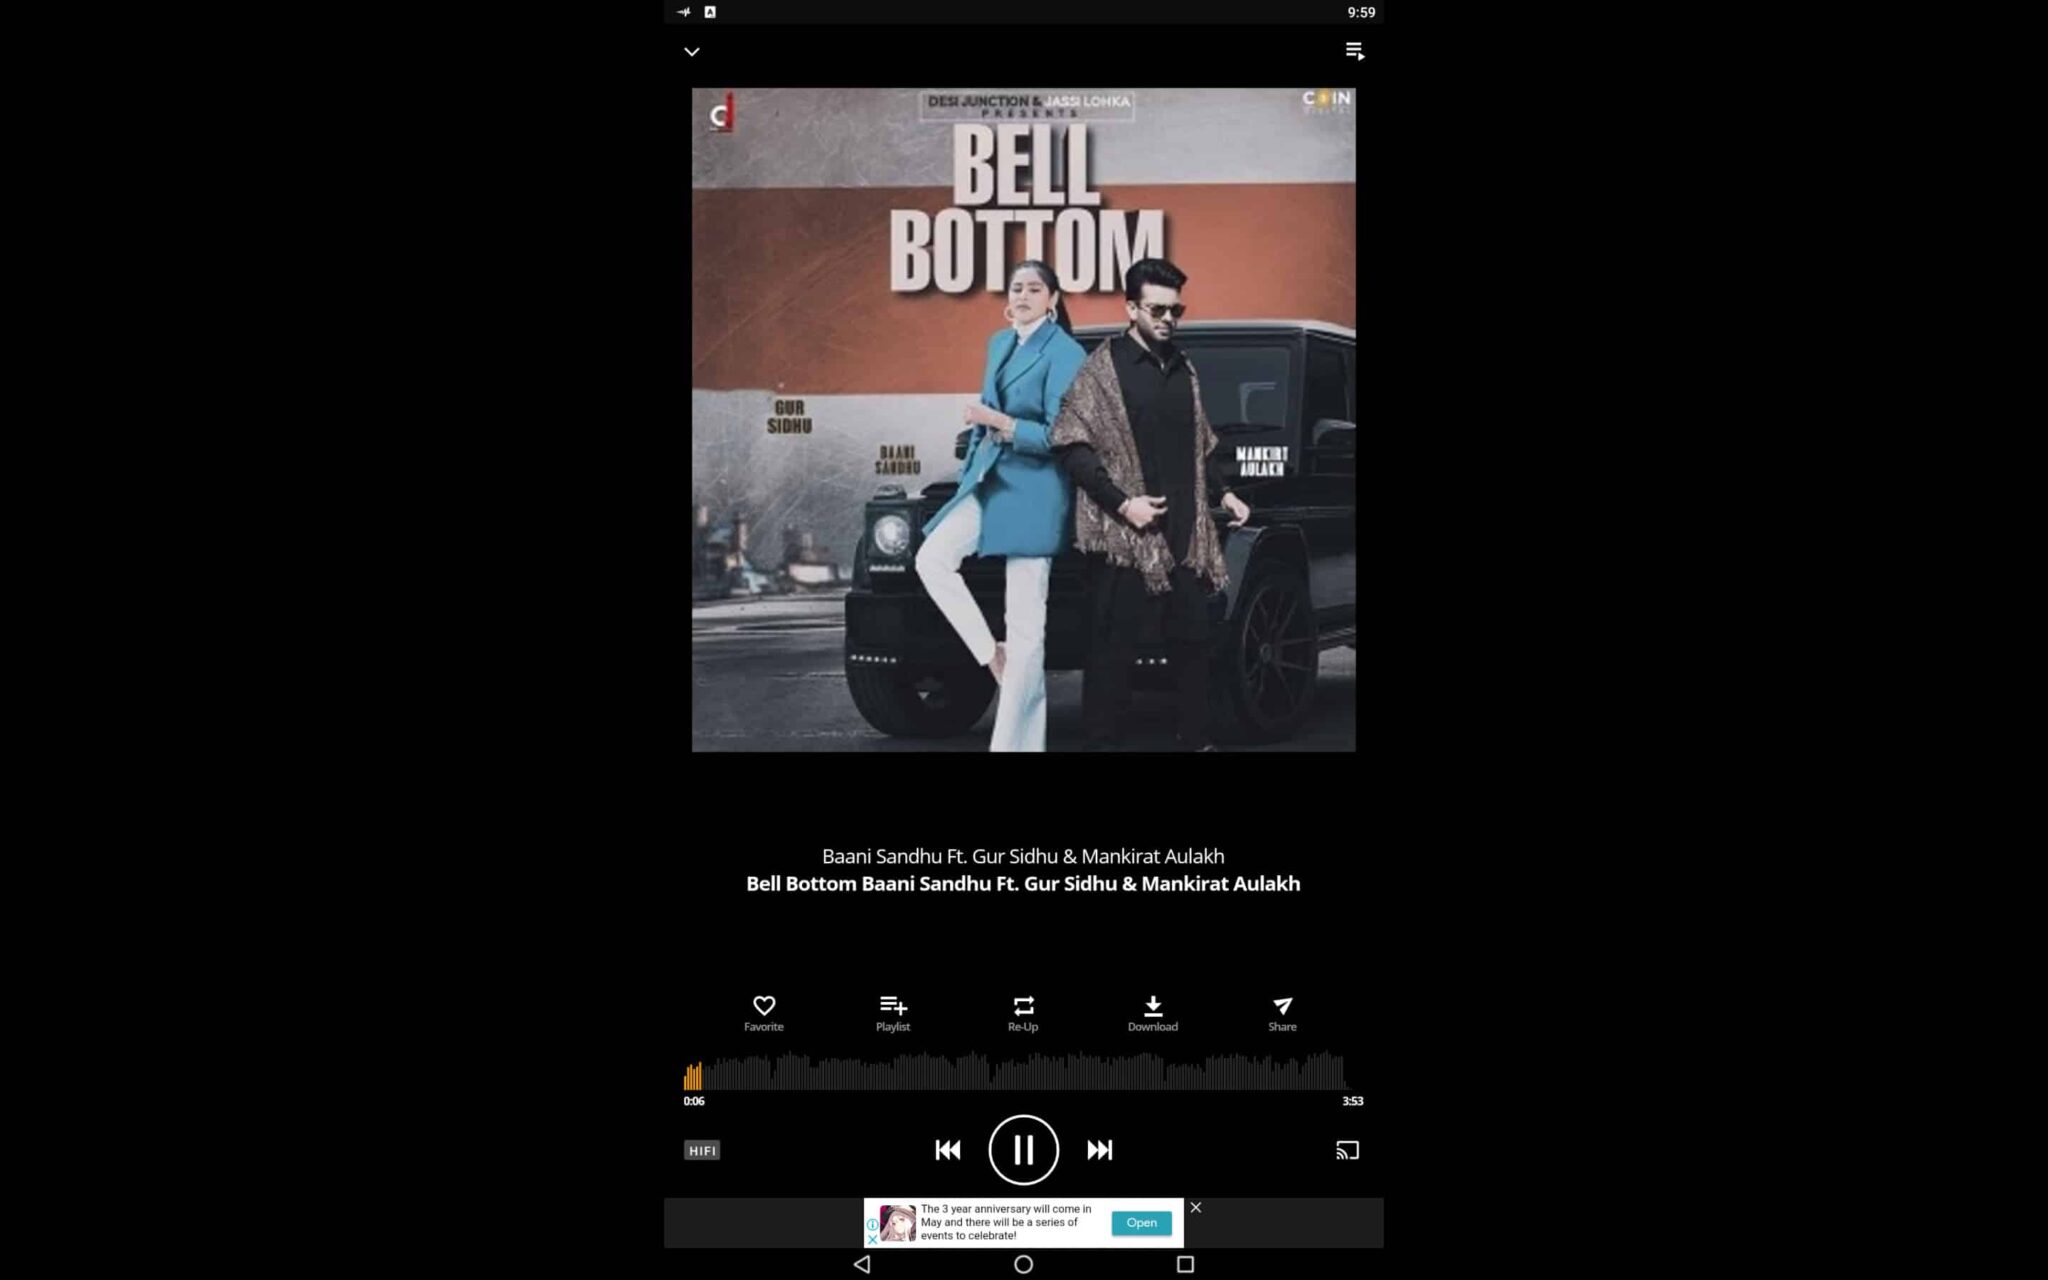 download audiomack for pc